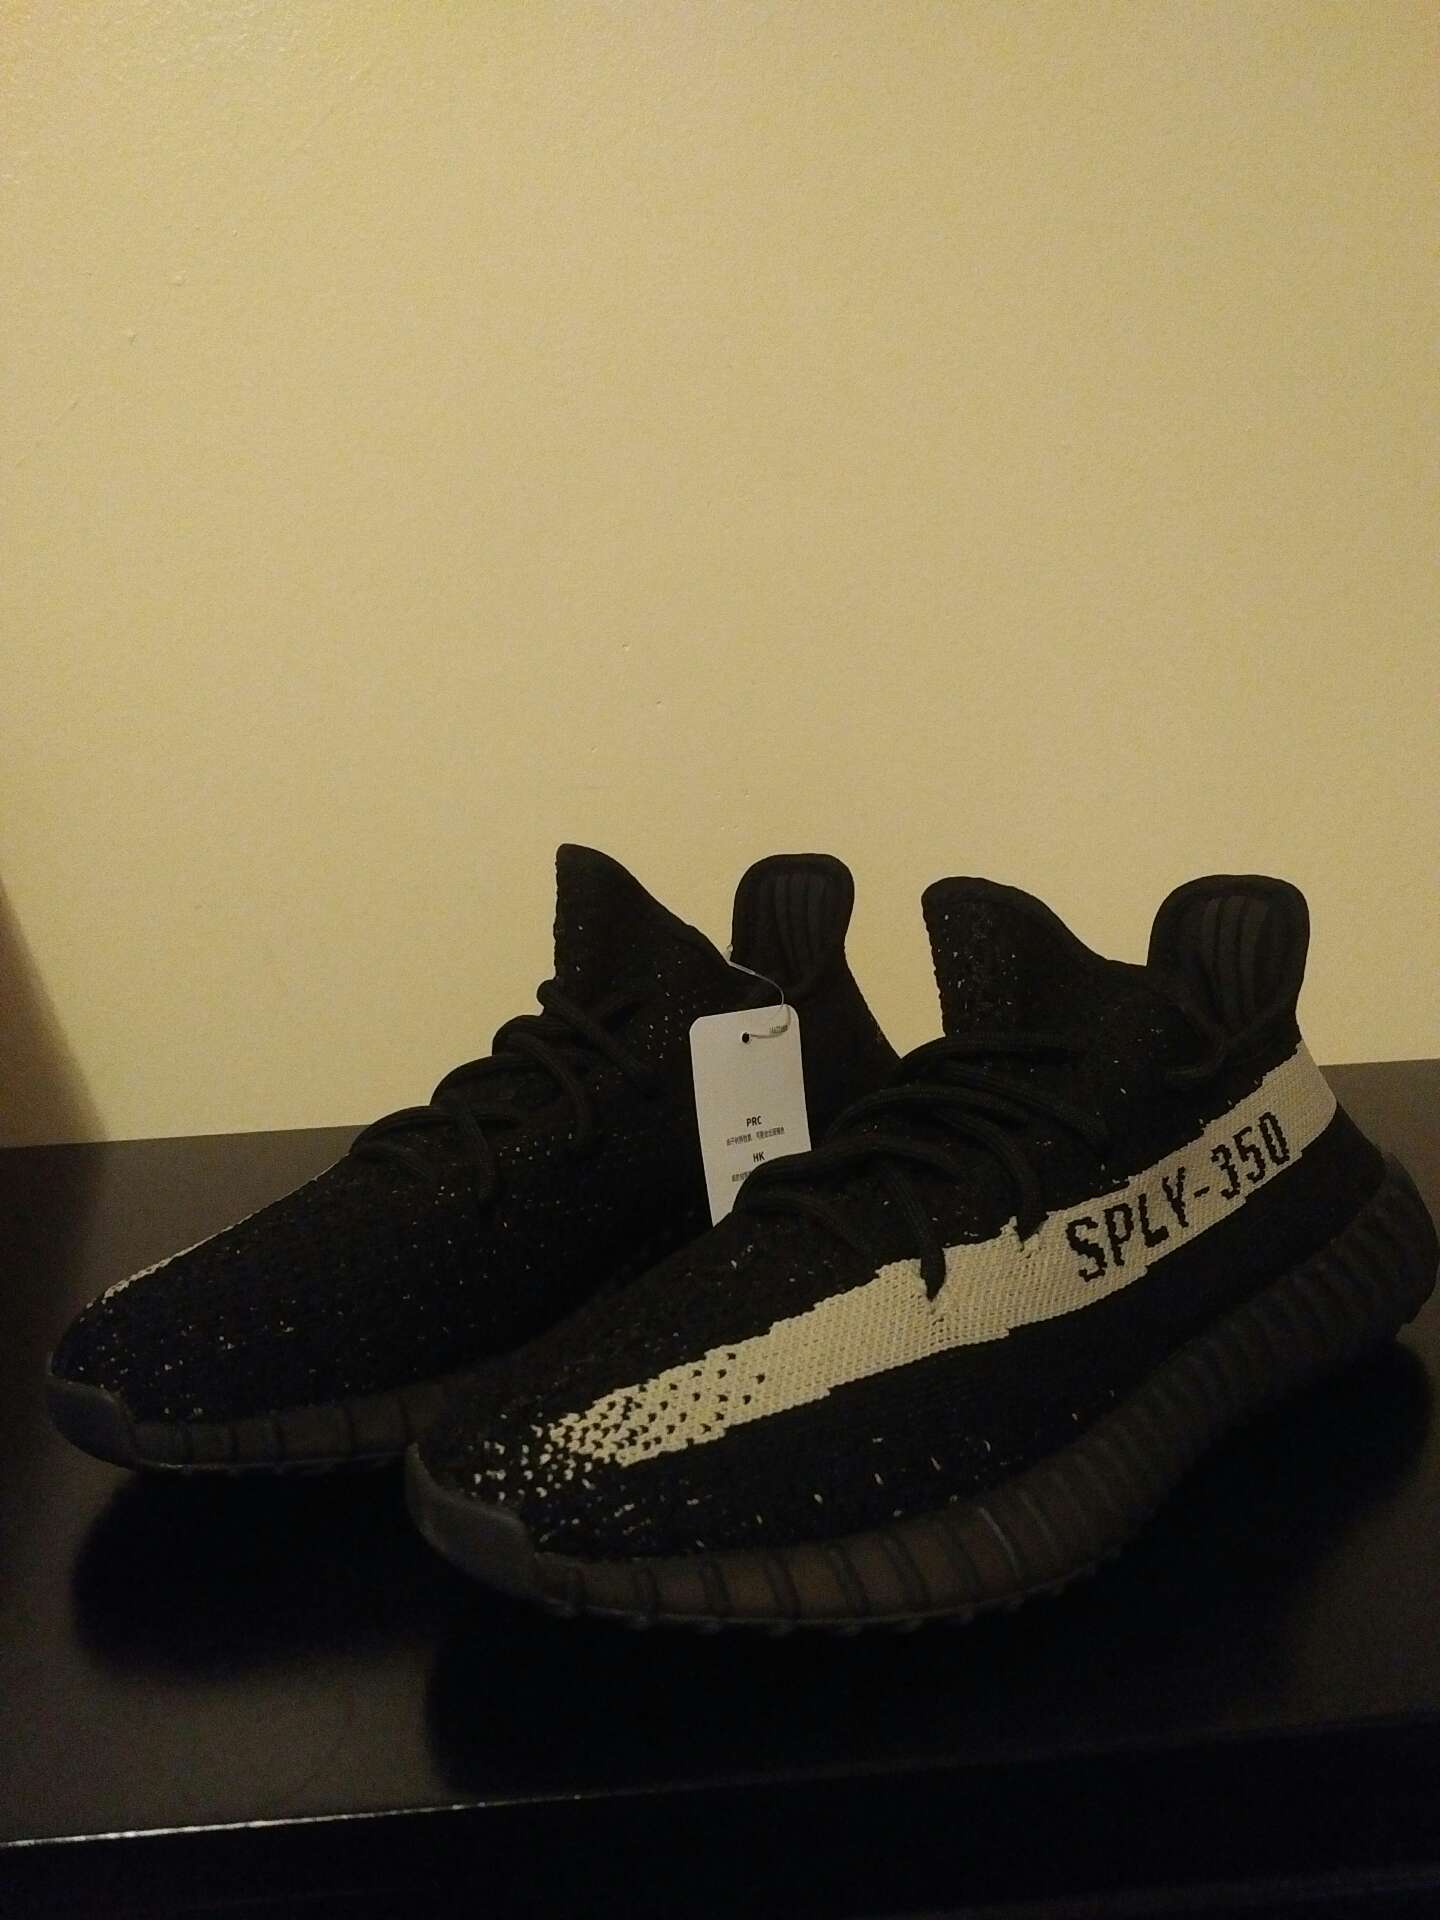 Adidas Yeezy Boost 350 V2 $ 79.99 Cheap Sale BY 1604